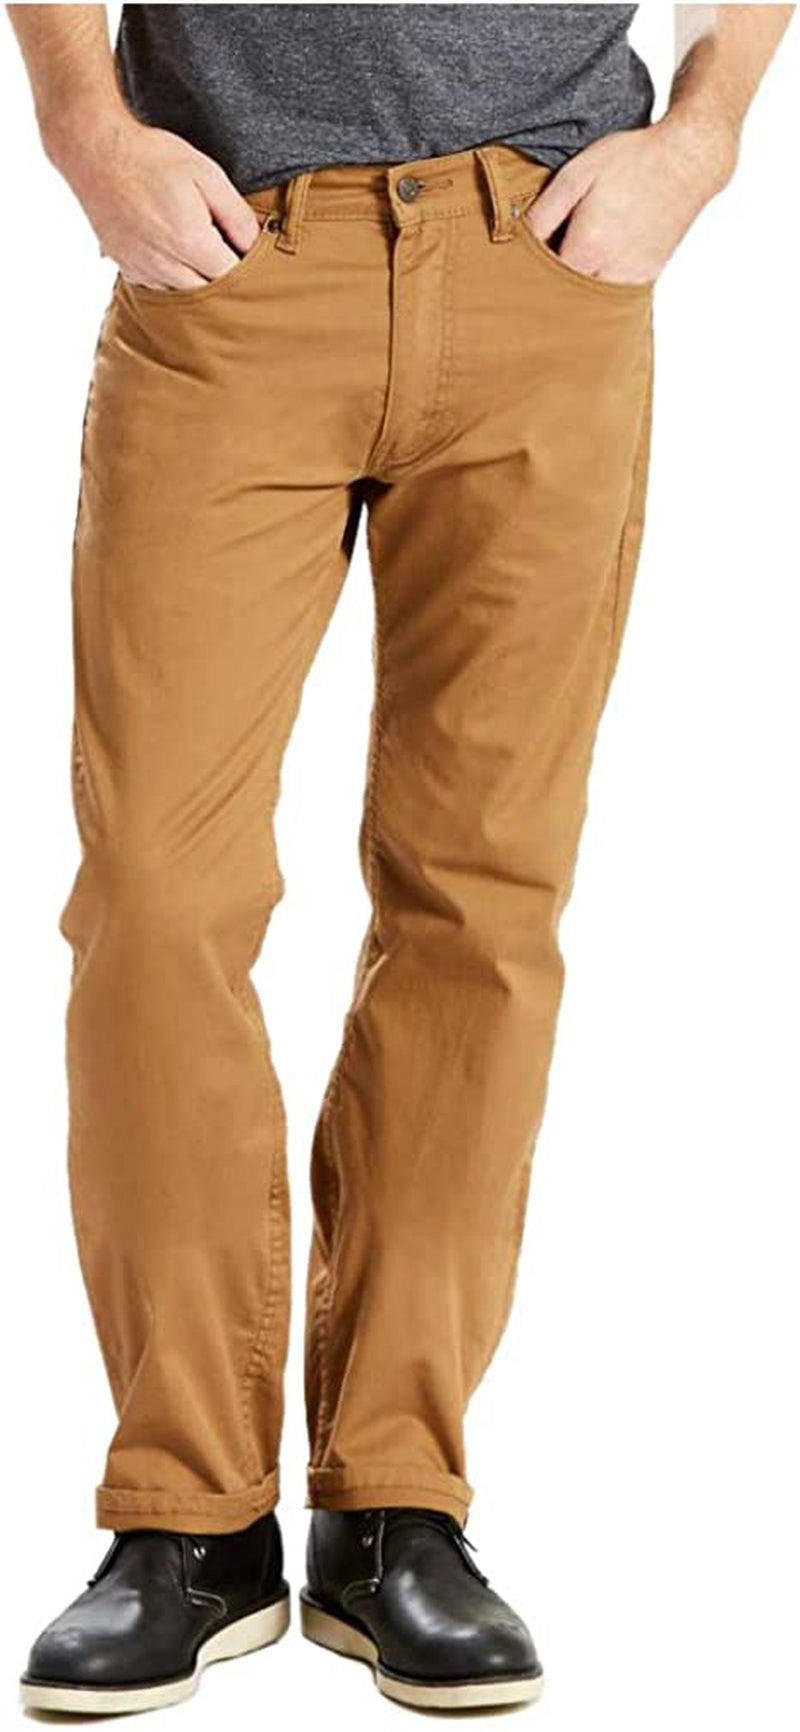 Cotton Levi's jeans in brown. Five-pocket styling. Zip-fly. Belt loops at waistband. 